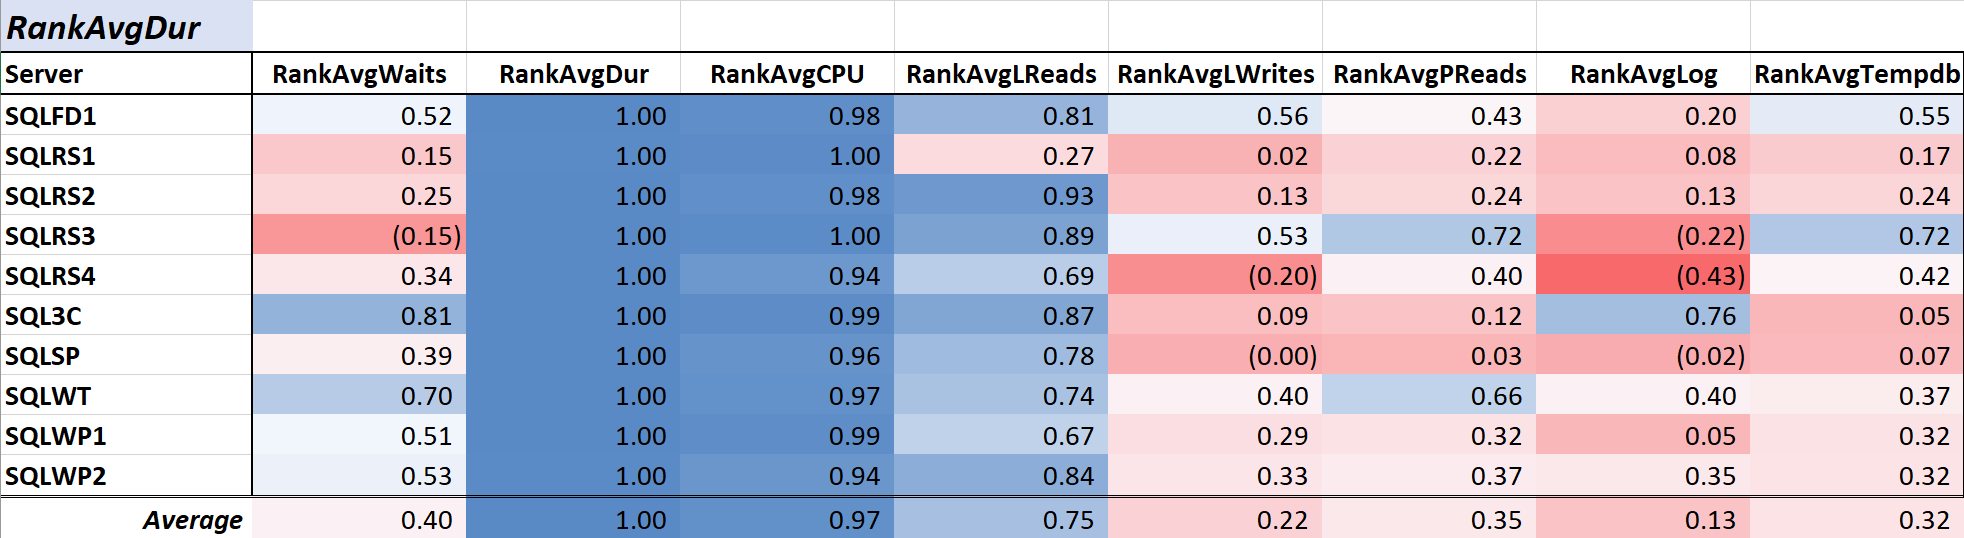 Table 2: Correlation with Avg Query Duration (ms)